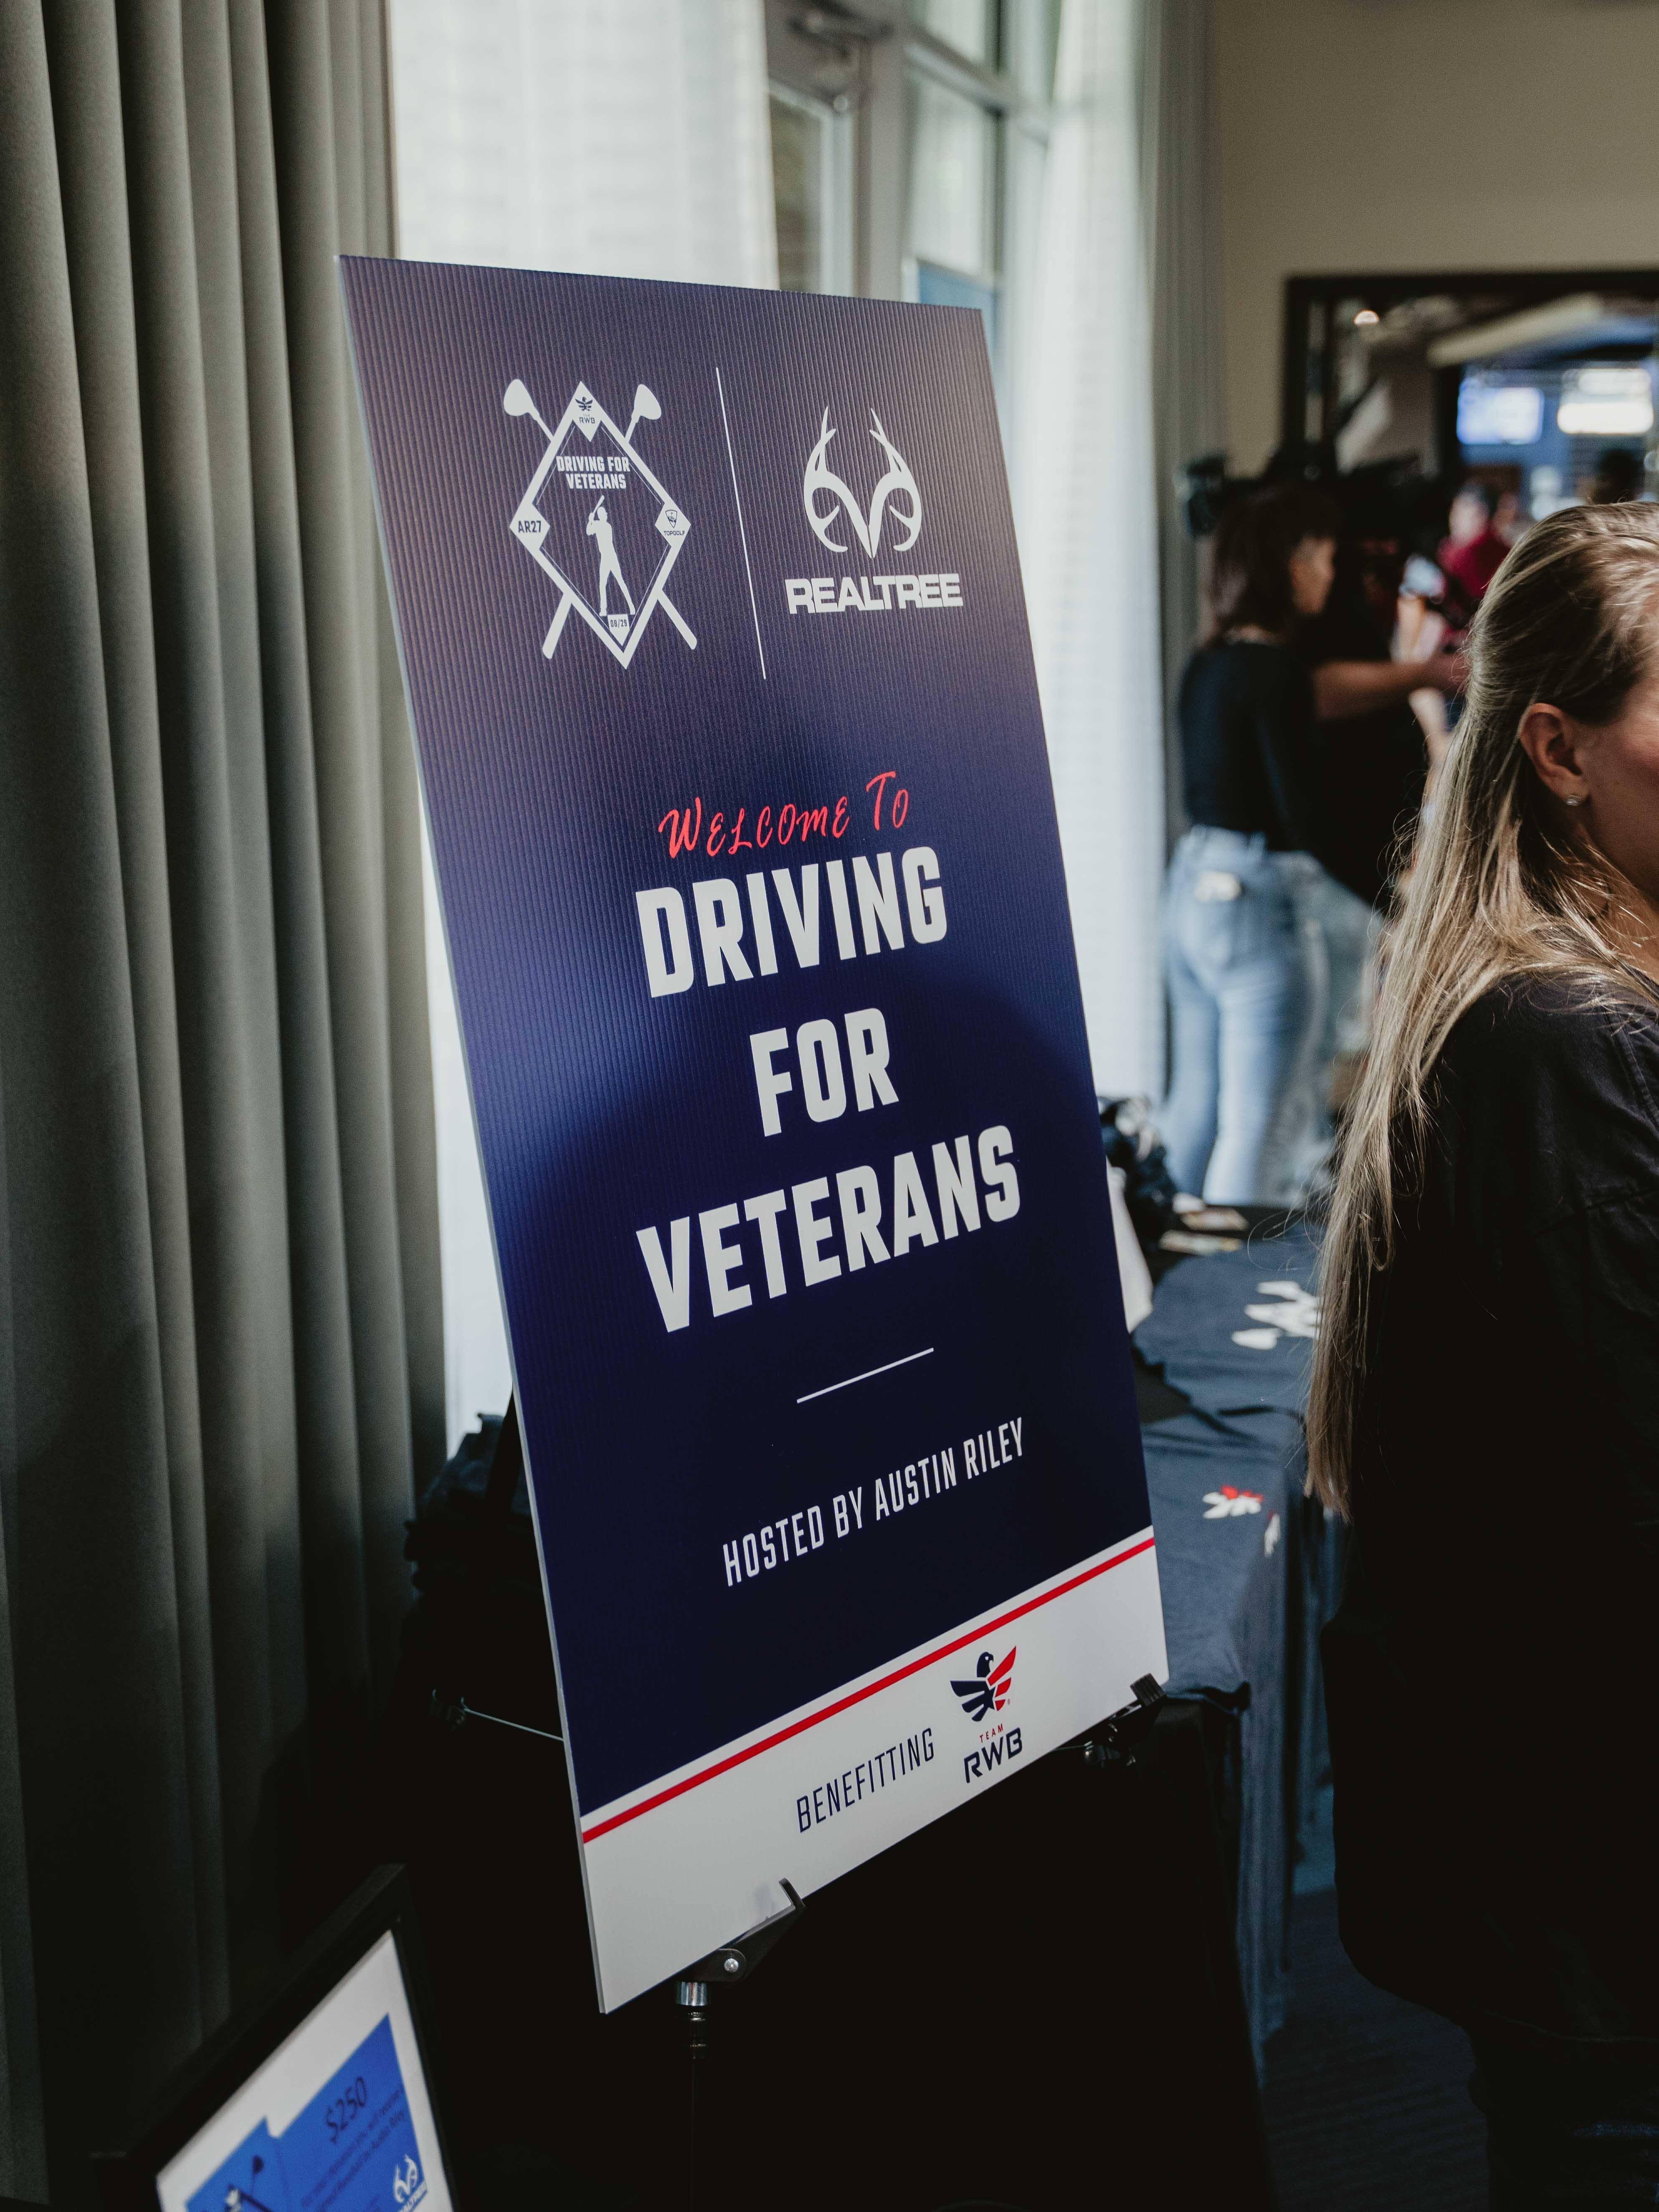 The Driving for Veterans charity event raised more than $80,000. Image by Team Realtree